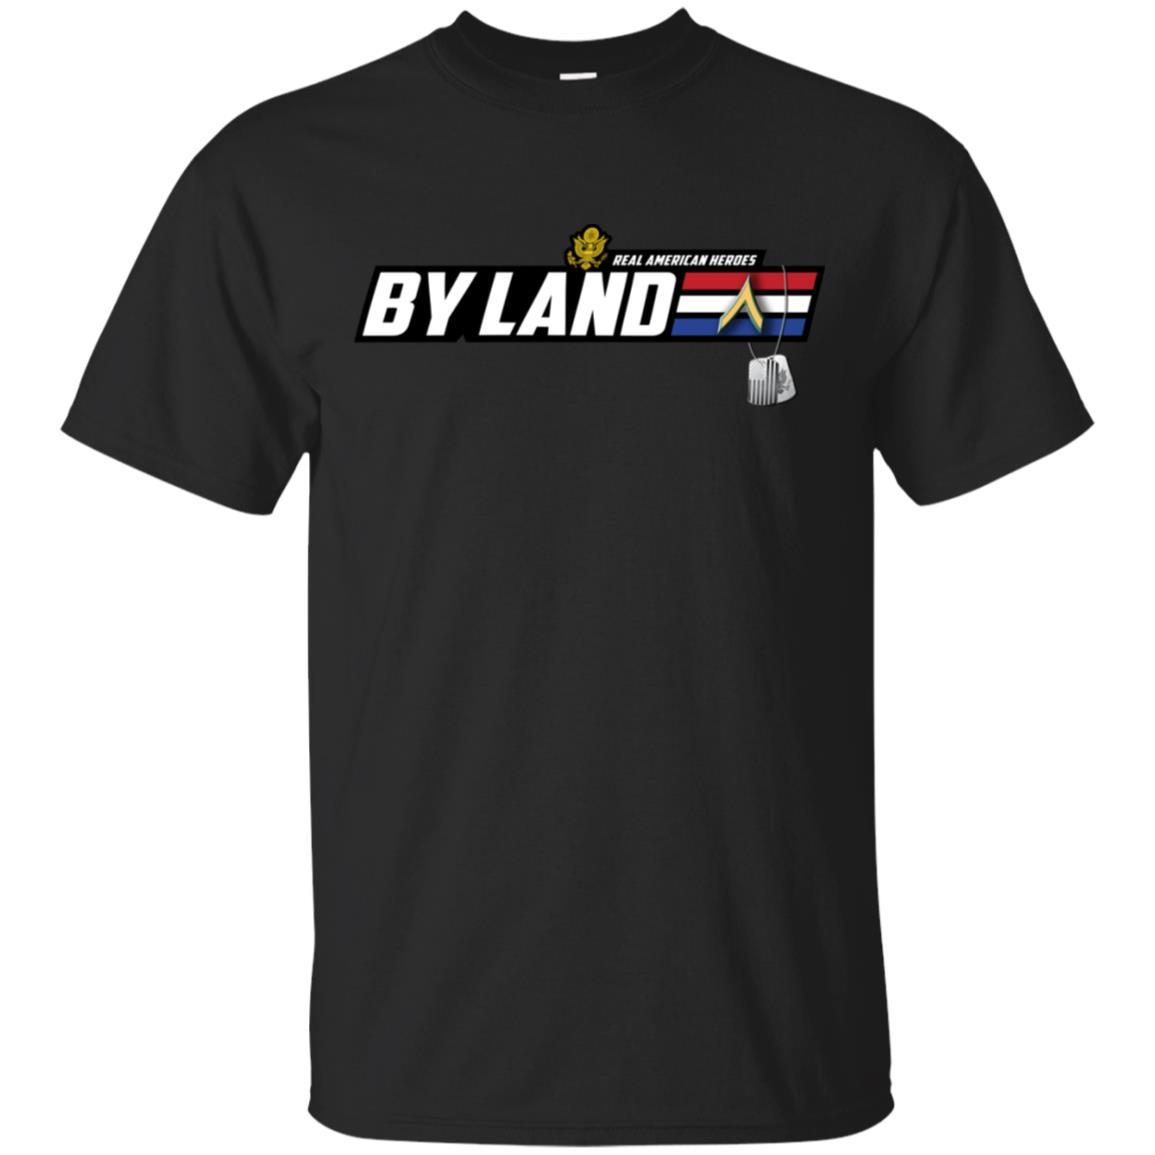 US Army T-Shirt "Real American Heroes By Land" E-2 PV2(Private) On Front-TShirt-Army-Veterans Nation